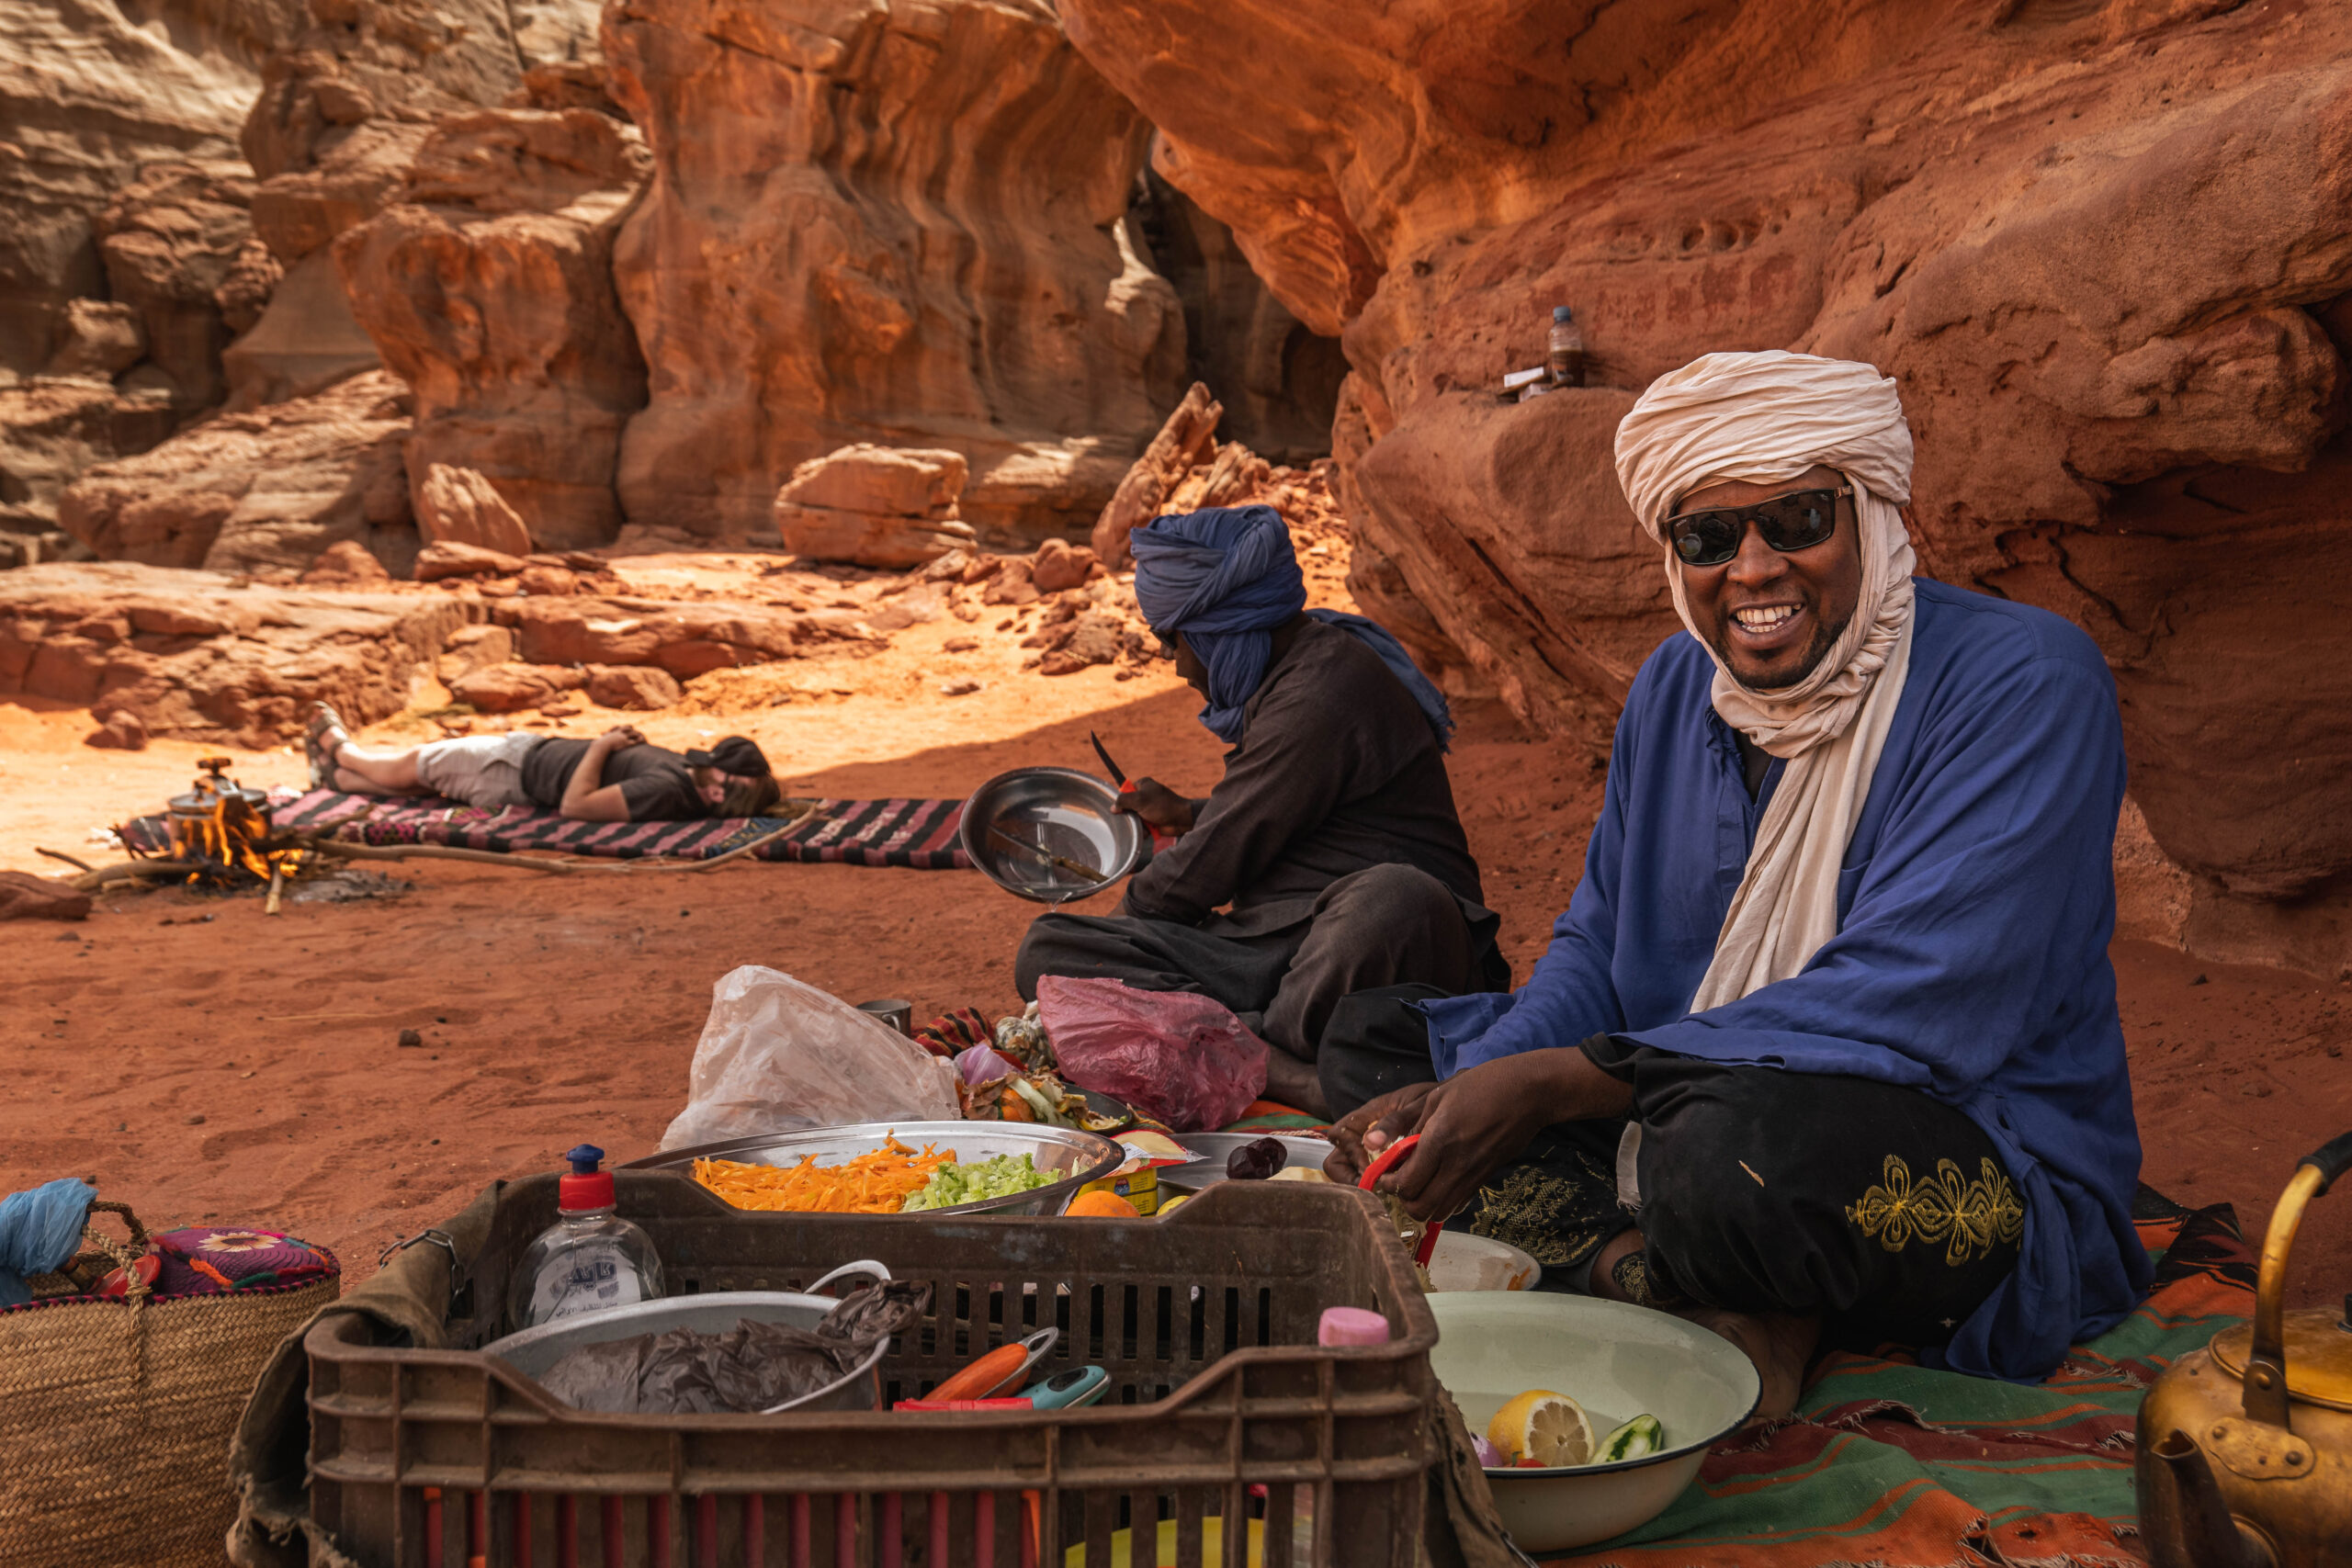 Tuareg guide Muhammad prepares lunch while 'astronaut' Niels Van De Linde takes an afternoon nap after a busy day of shooting in Algeria